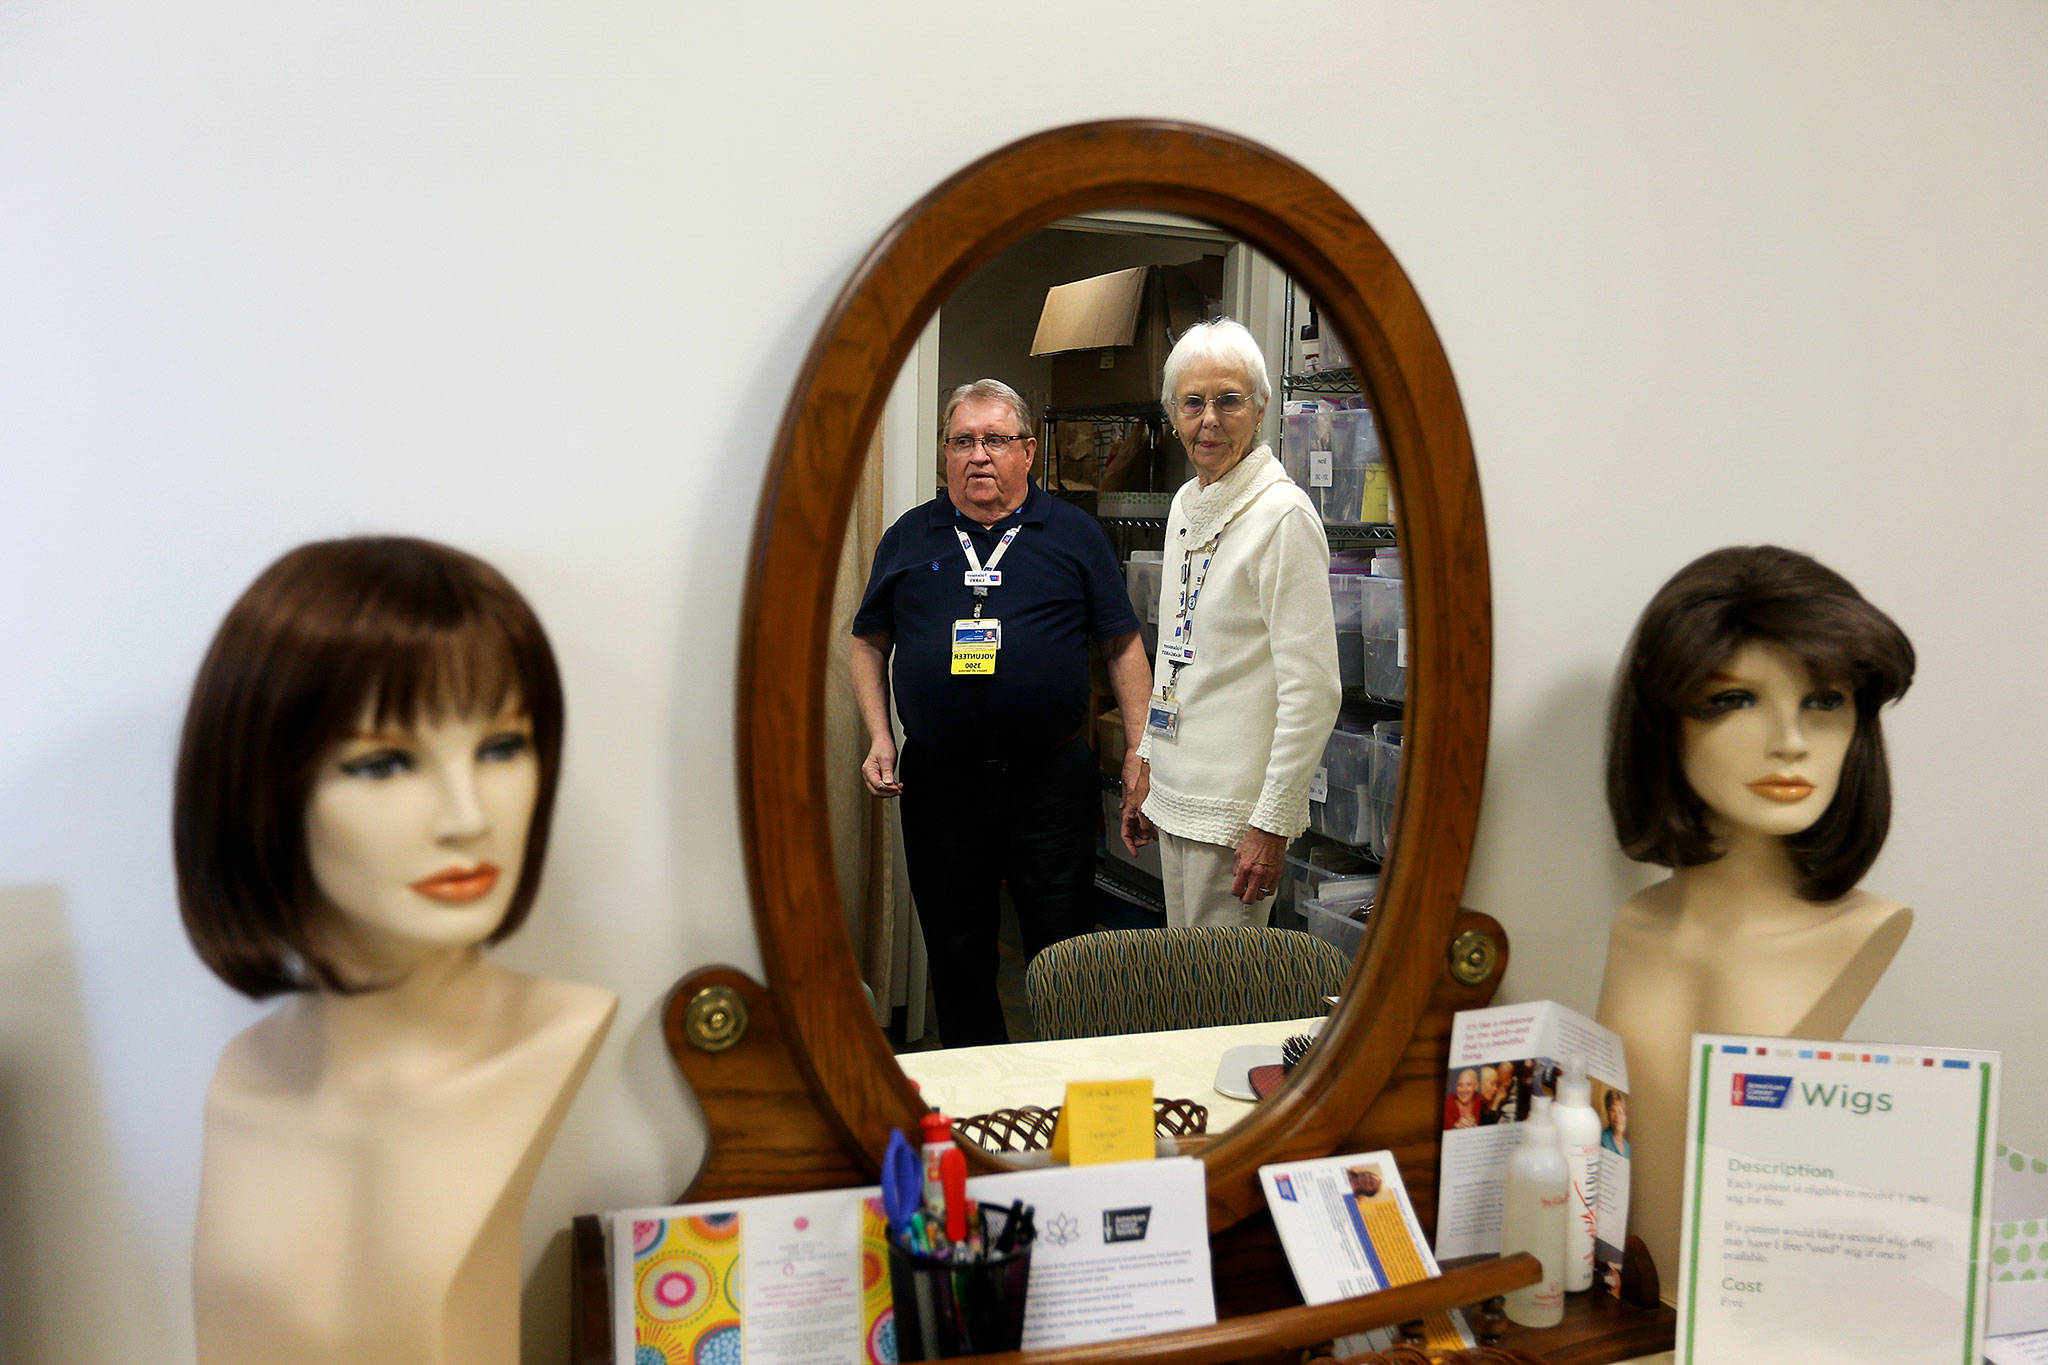 American Cancer Society volunteern Larry Behan and Margaret Miner look over Spirit Healing Boutique, where cancer patients can get wigs, at the Cancer Resource Center at Providence Regional Medical Centeron on Oct. 31 in Everett. (Andy Bronson / The Herald)